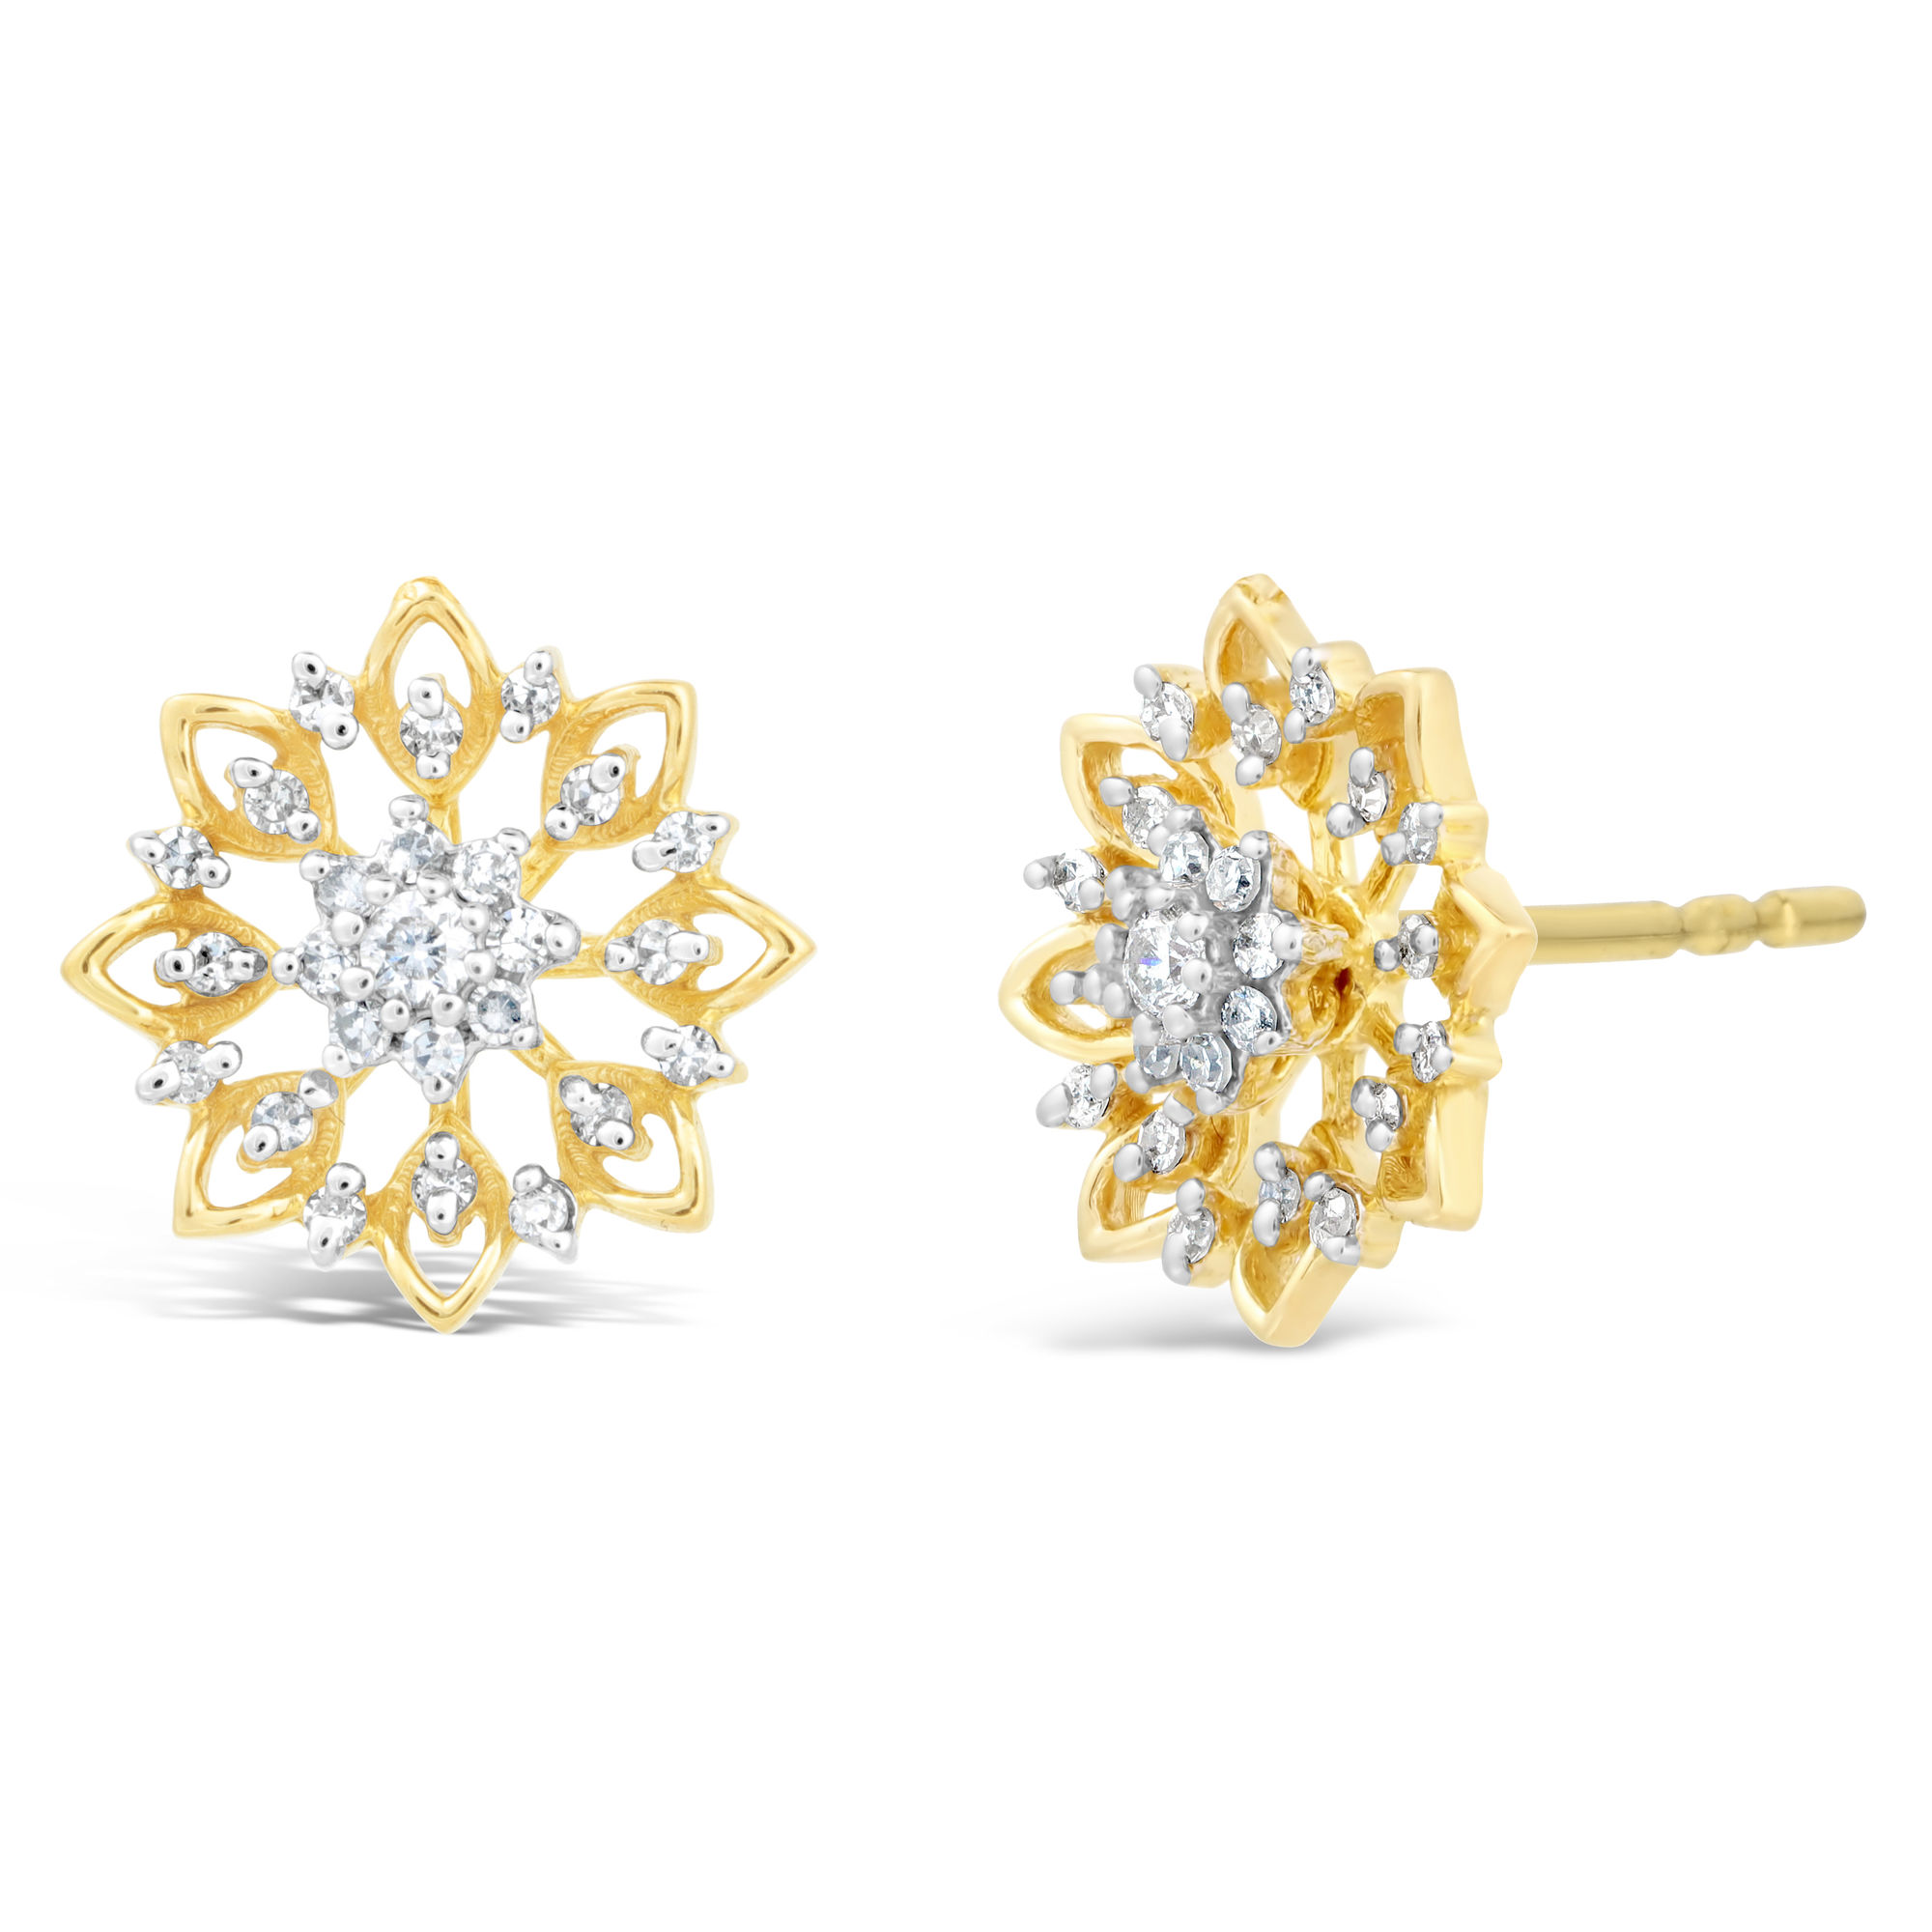 Lavari Jewelers Women's Snowflake Stud Diamond Earrings with Friction Back, 925 Yellow Sterling Silver, .14 Cttw